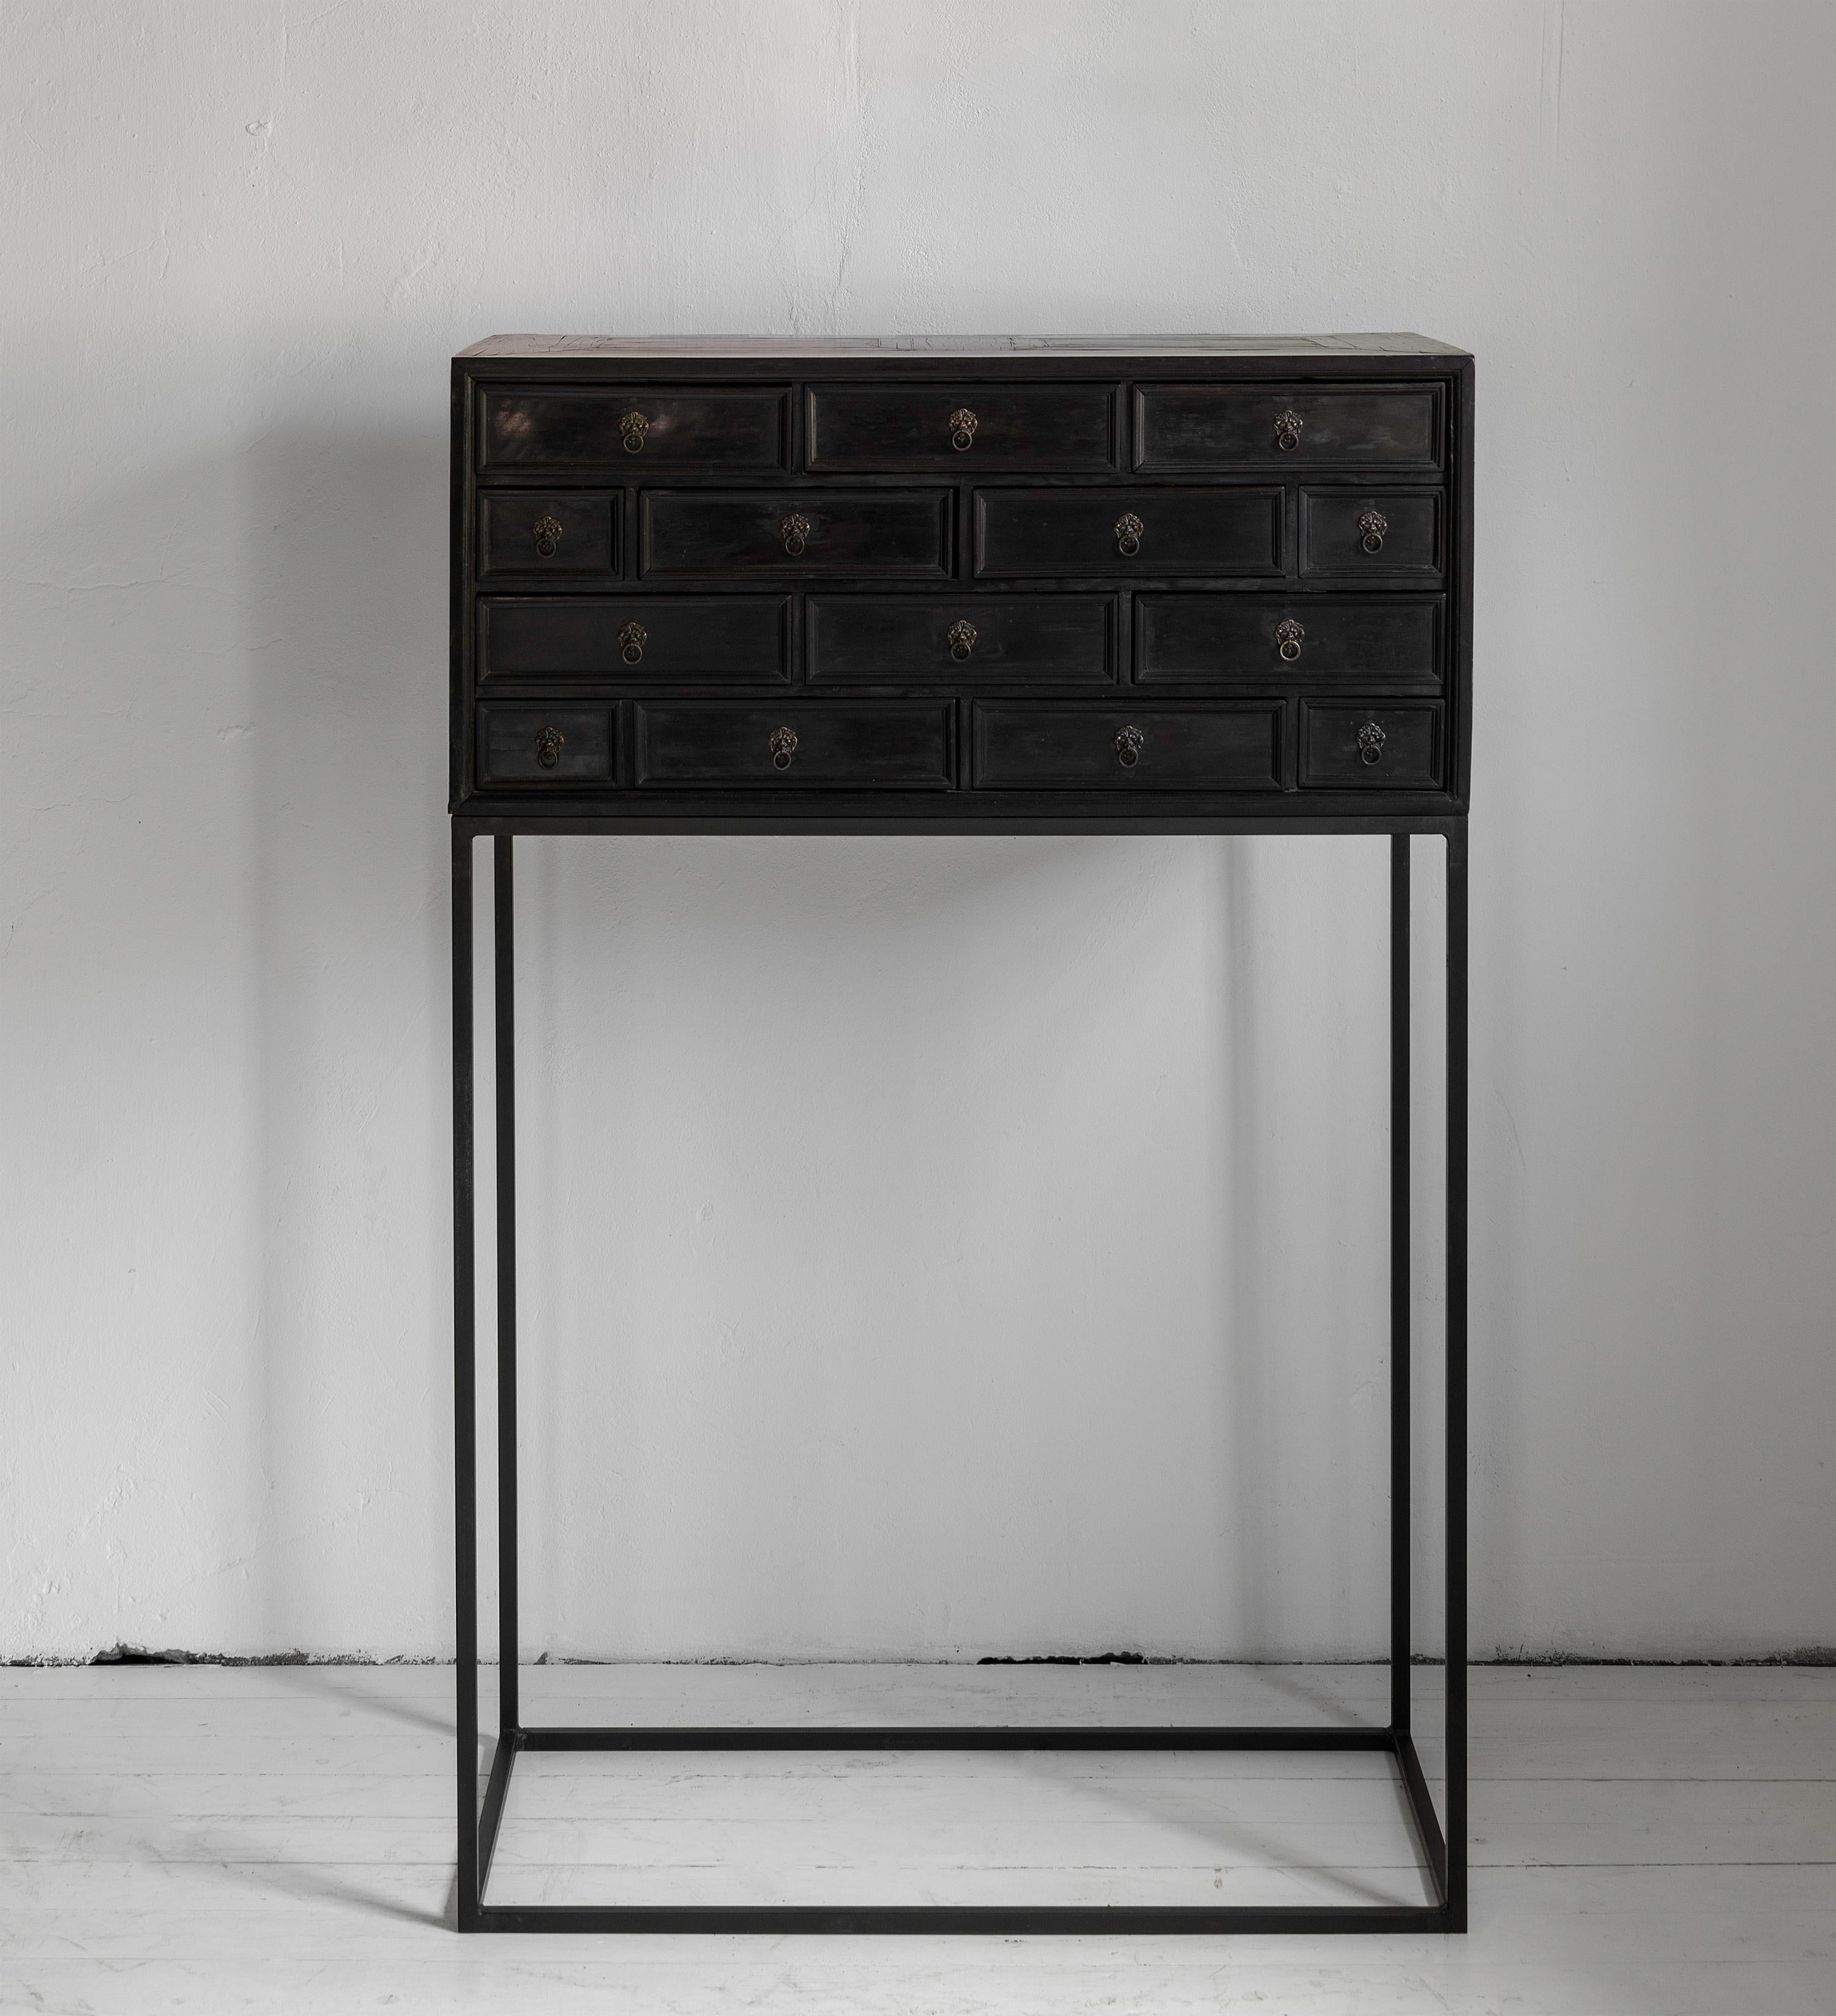 Elegant Minimalistic 17th Century Ebonized Cabinet on a Contemporary Steel Stand For Sale 2